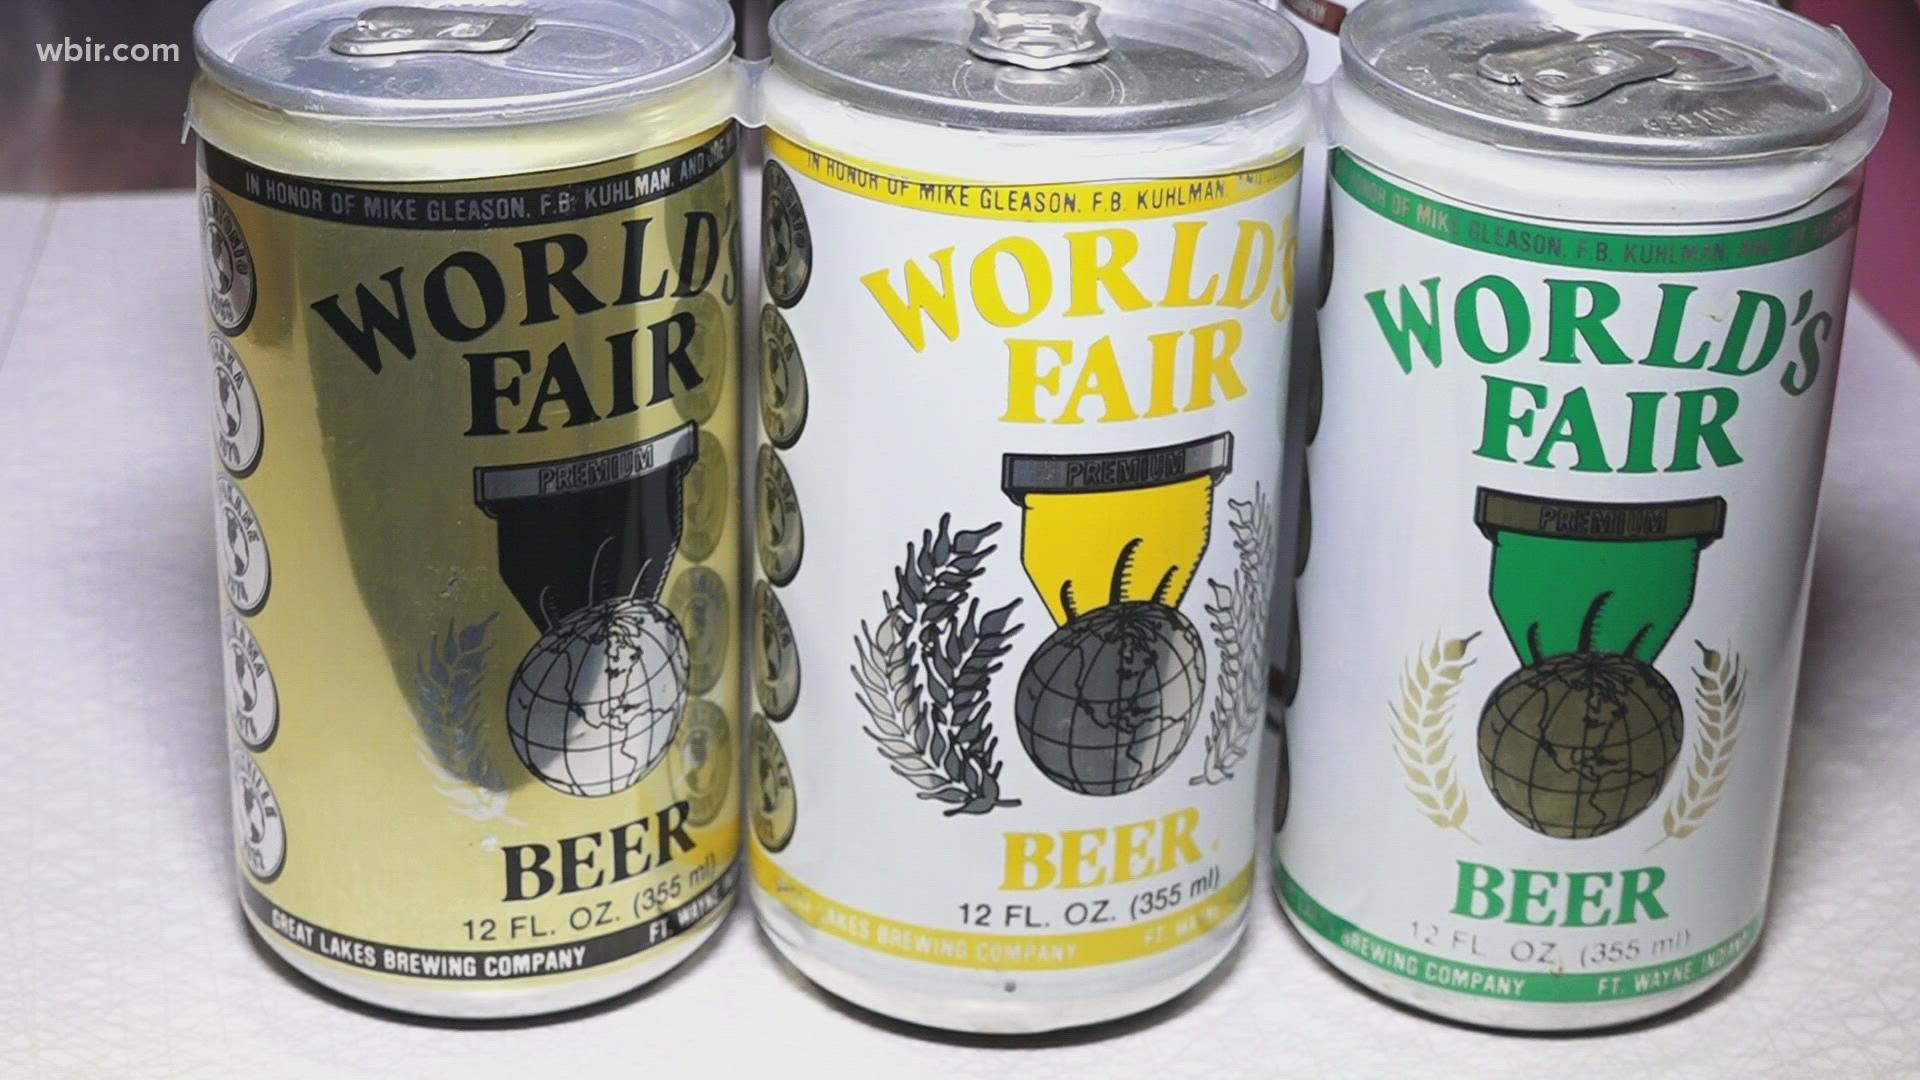 The original World's Fair Beer was... bad. This time around, Knoxville's brewers will make good beers representing 20 of the countries from the 1982 World's Fair.